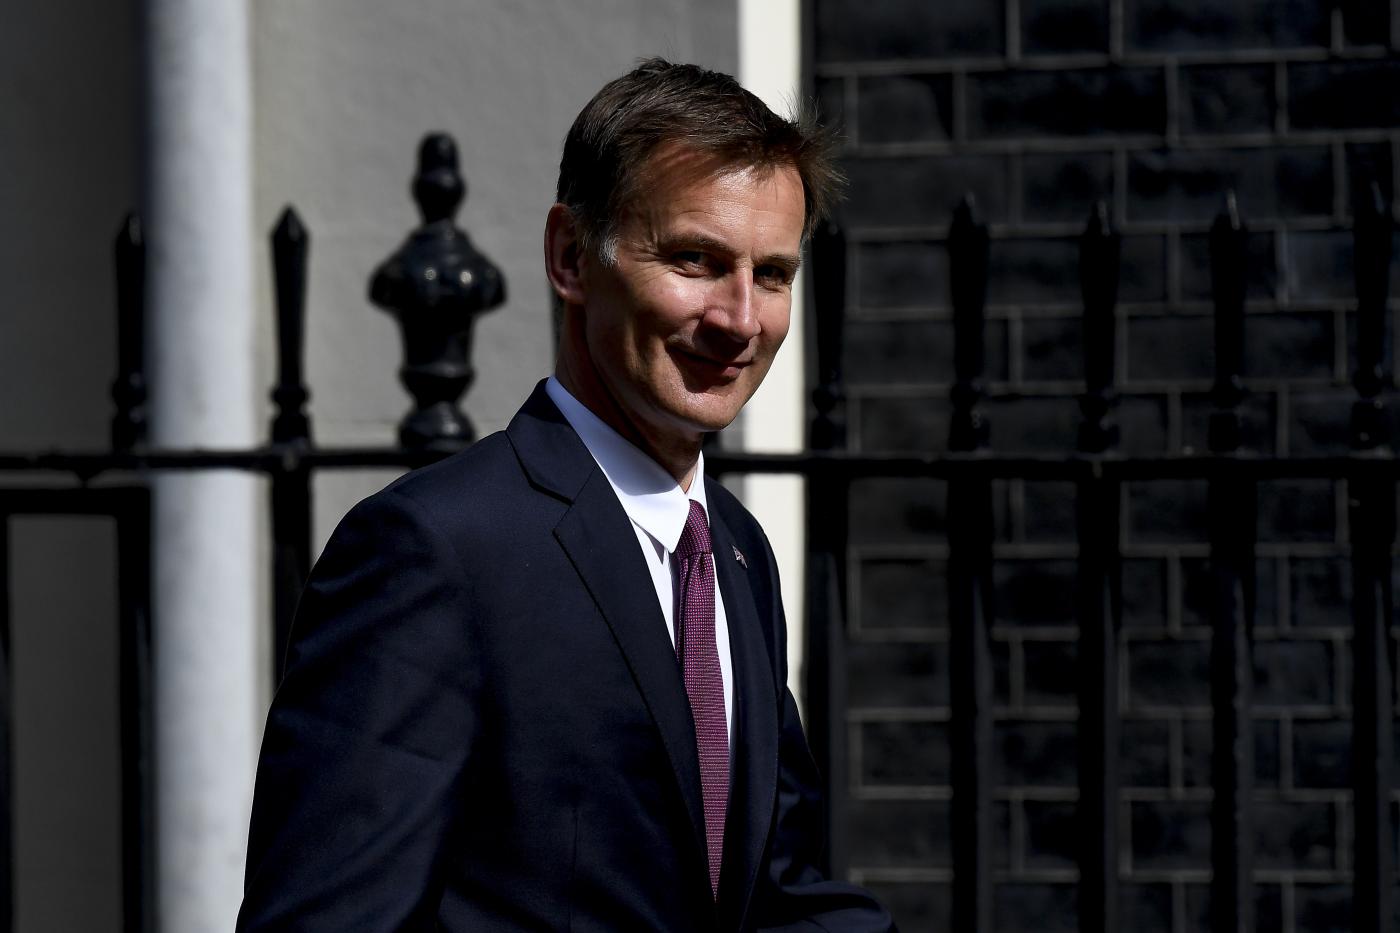 LONDON, June 20, 2019 (Xinhua) -- File photo taken on June 18, 2019 shows British Foreign Secretary Jeremy Hunt arriving at 10 Downing Street to attend a cabinet meeting in London, Britain. Former Foreign Secretary Boris Johnson and his successor as foreign secretary Jeremy Hunt emerged on June 20, 2019 as the two politicians in the final battle to become the UK's next Prime Minister. (Xinhua/IANS) by Alberto Pezzali.